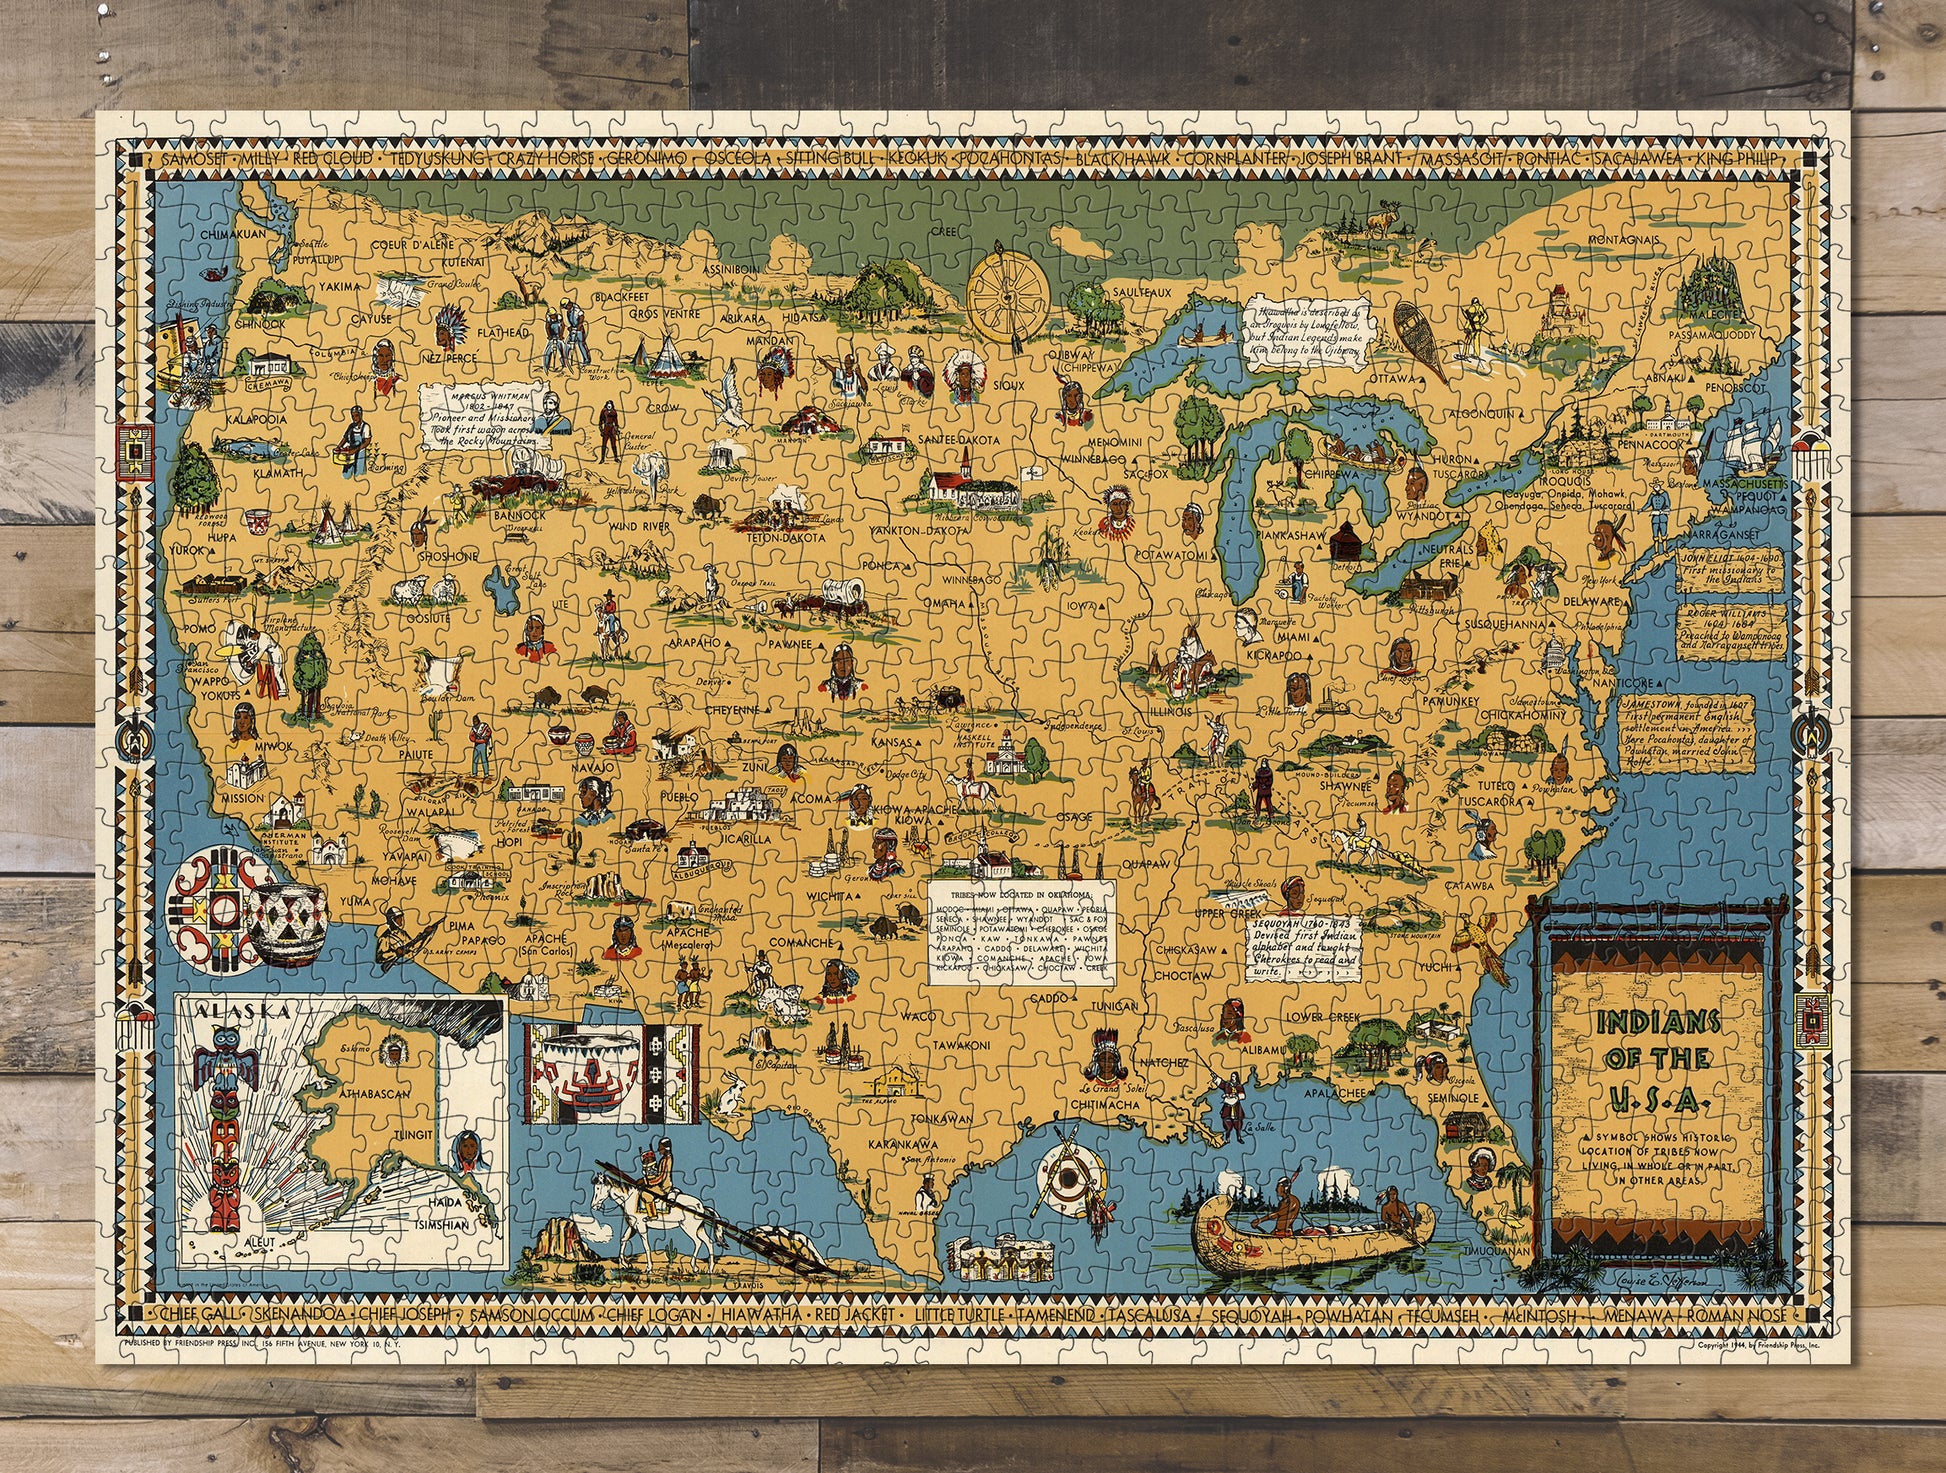 1000 piece puzzle 1944 Map of Indians of the U.S.A. Jigsaw Puzzle Game for Adults